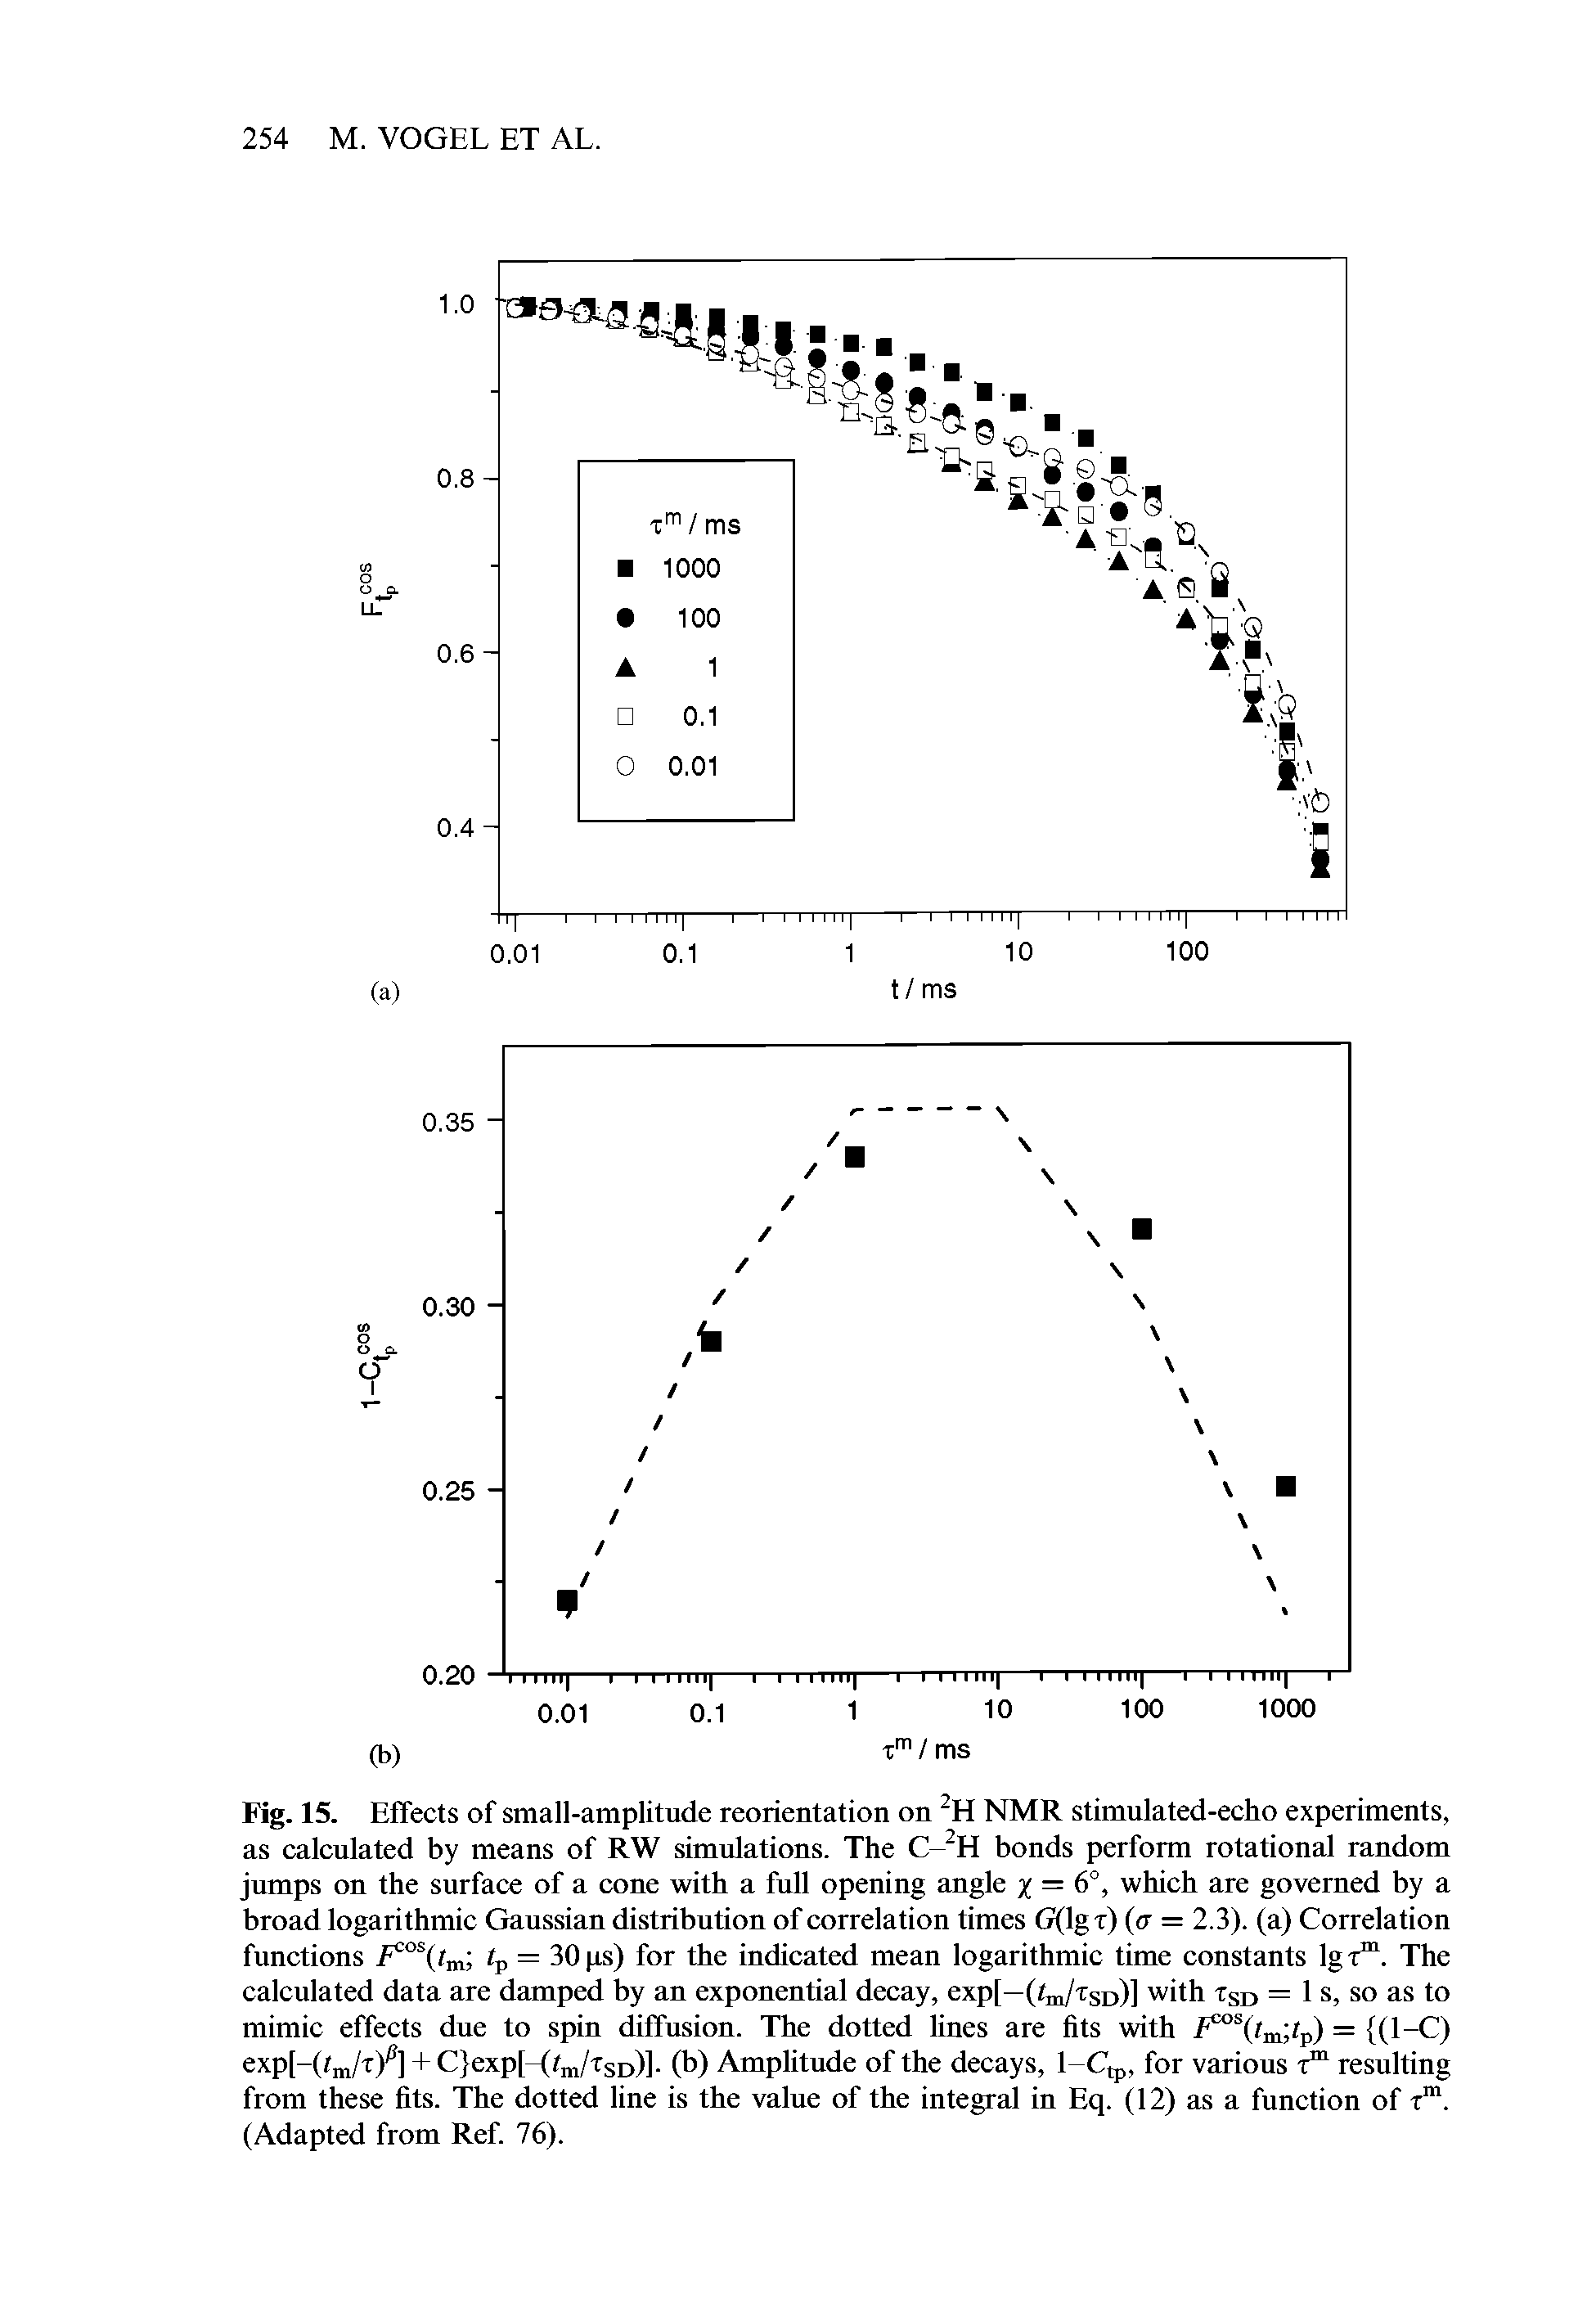 Fig. 15. Effects of small-amplitude reorientation on 2H NMR stimulated-echo experiments, as calculated by means of RW simulations. The C-2H bonds perform rotational random jumps on the surface of a cone with a full opening angle % = 6°, which are governed by a broad logarithmic Gaussian distribution of correlation times G(lgr) (a = 2.3). (a) Correlation functions m tp — 30 is) for the indicated mean logarithmic time constants lgr 1. The calculated data are damped by an exponential decay, exp[—(tm/rso)] with rSD = 1 s, so as to mimic effects due to spin diffusion. The dotted lines are fits with Fcos(tm tp) = (1—C) expHtm/t/l + Qexp[—Om/rso)]- (b) Amplitude of the decays, 1-C,p, for various t resulting from these fits. The dotted line is the value of the integral in Eq. (12) as a function of rm. (Adapted from Ref. 76).